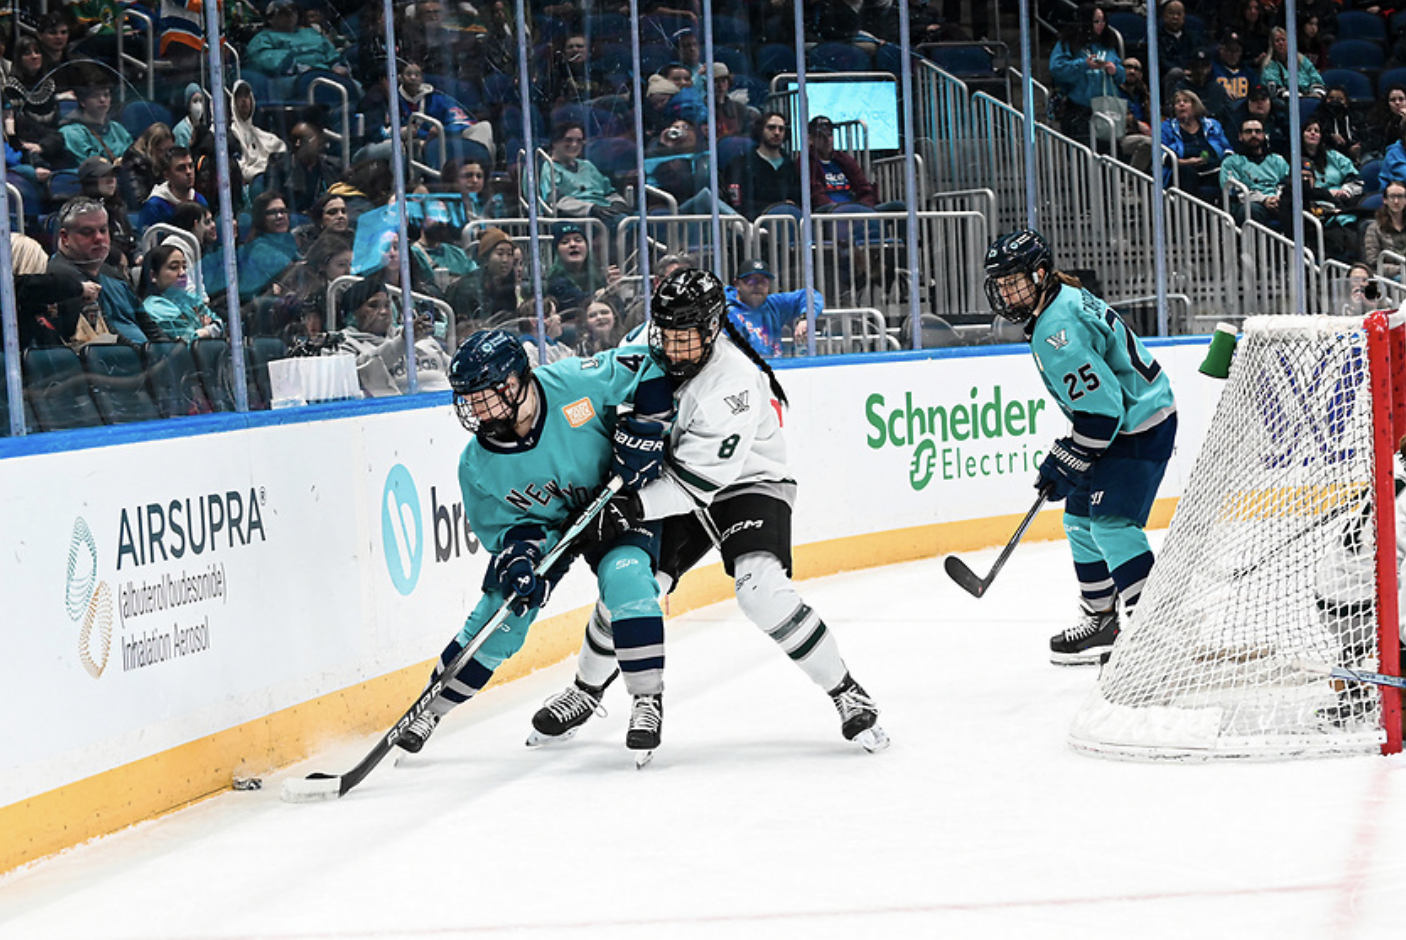 Adzija (right) battles for the puck with Baker (left) along the boards behind the New York net. Alex Carpenter looks on in the background. Adzija is in a white awa uniform, while Baker and Carpenter are in teal. 